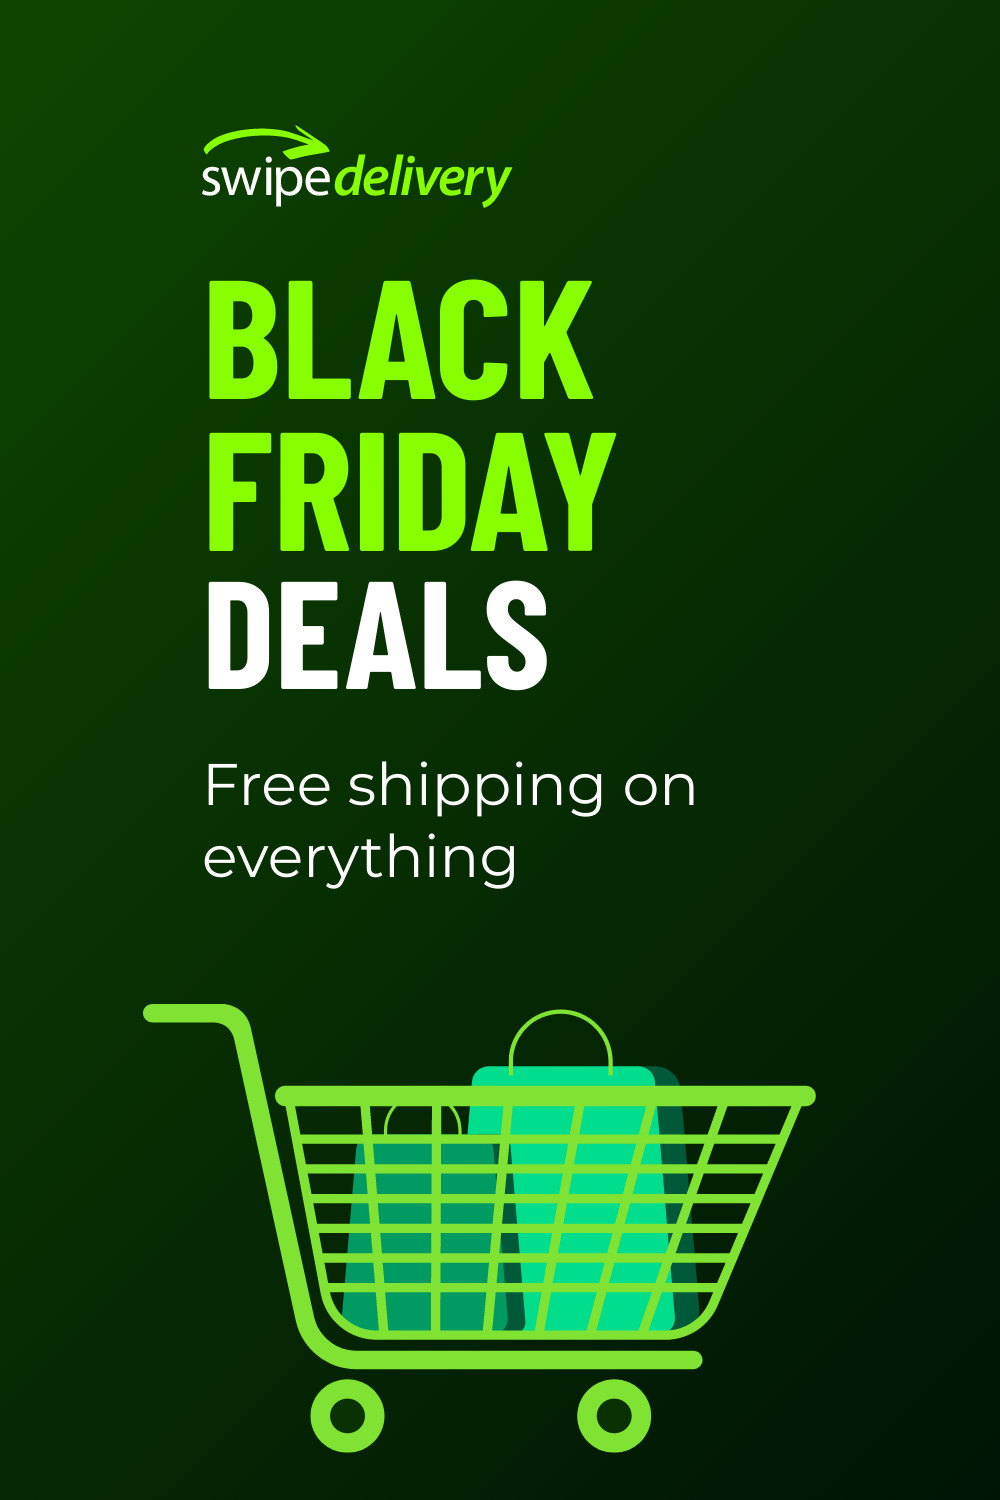 Green Delivery Black Friday